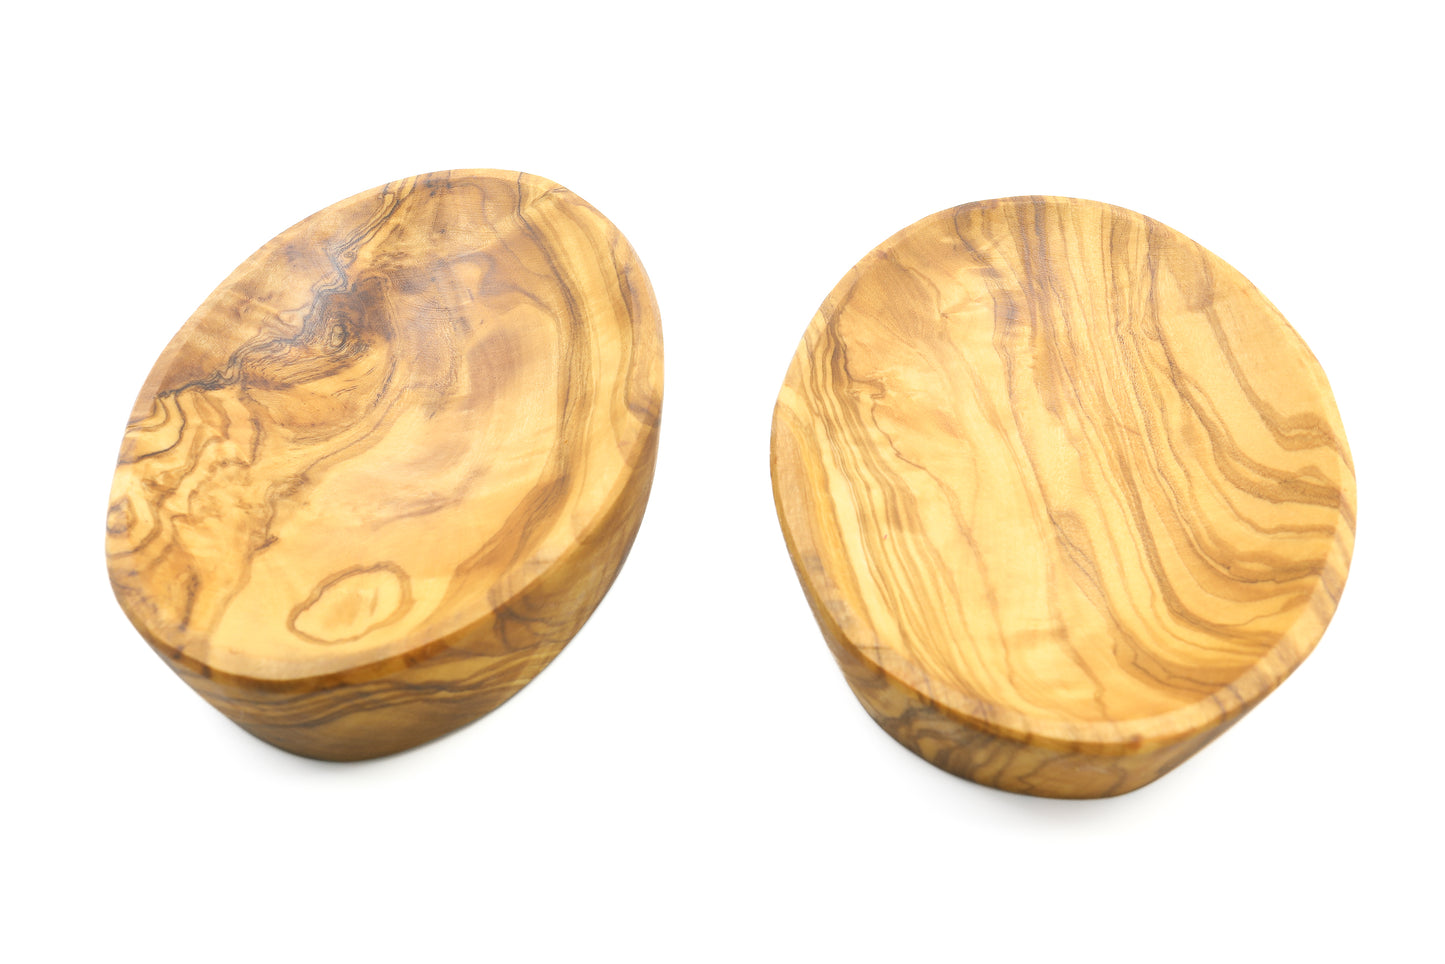 Olive wood oval bowl paired with an artisanal olive picker set